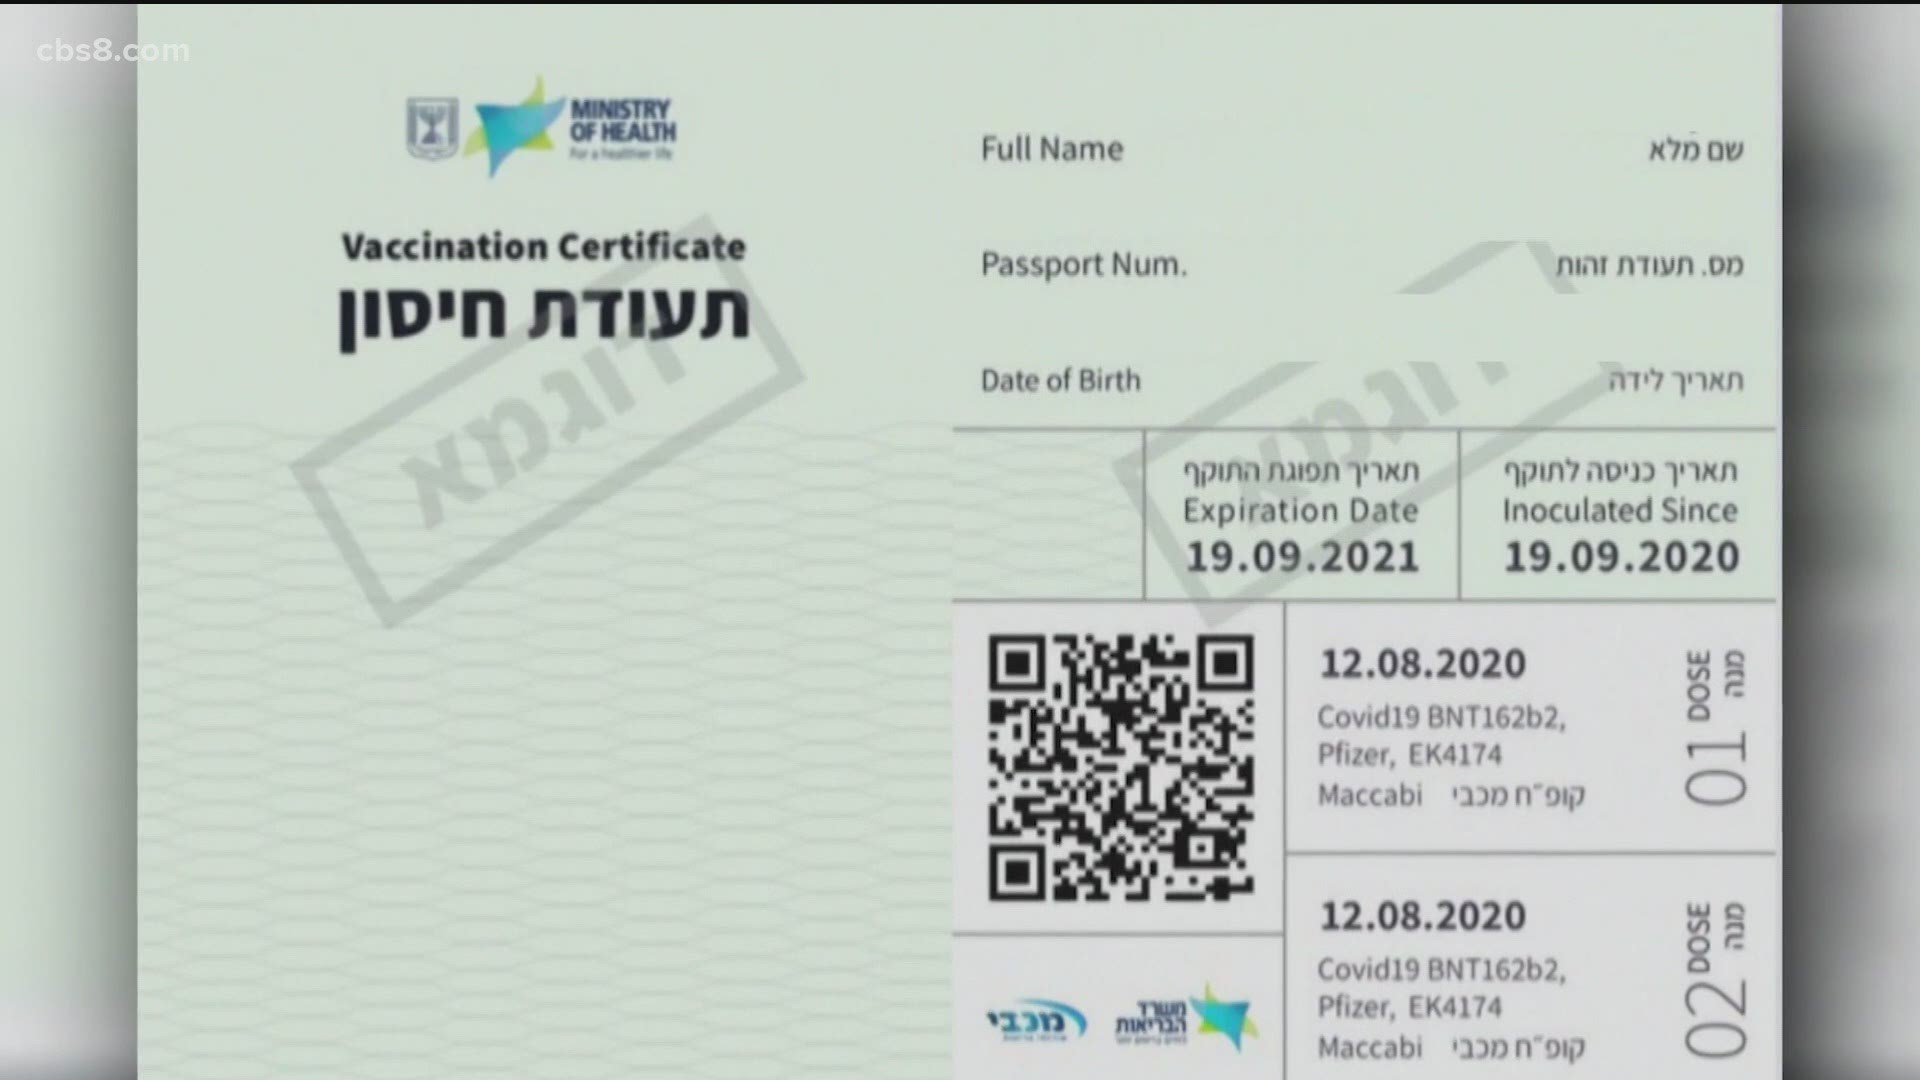 Already in use in Israel, "vaccine passports" are also being developed in the European Union and the United Kingdom, as well as Japan and China.